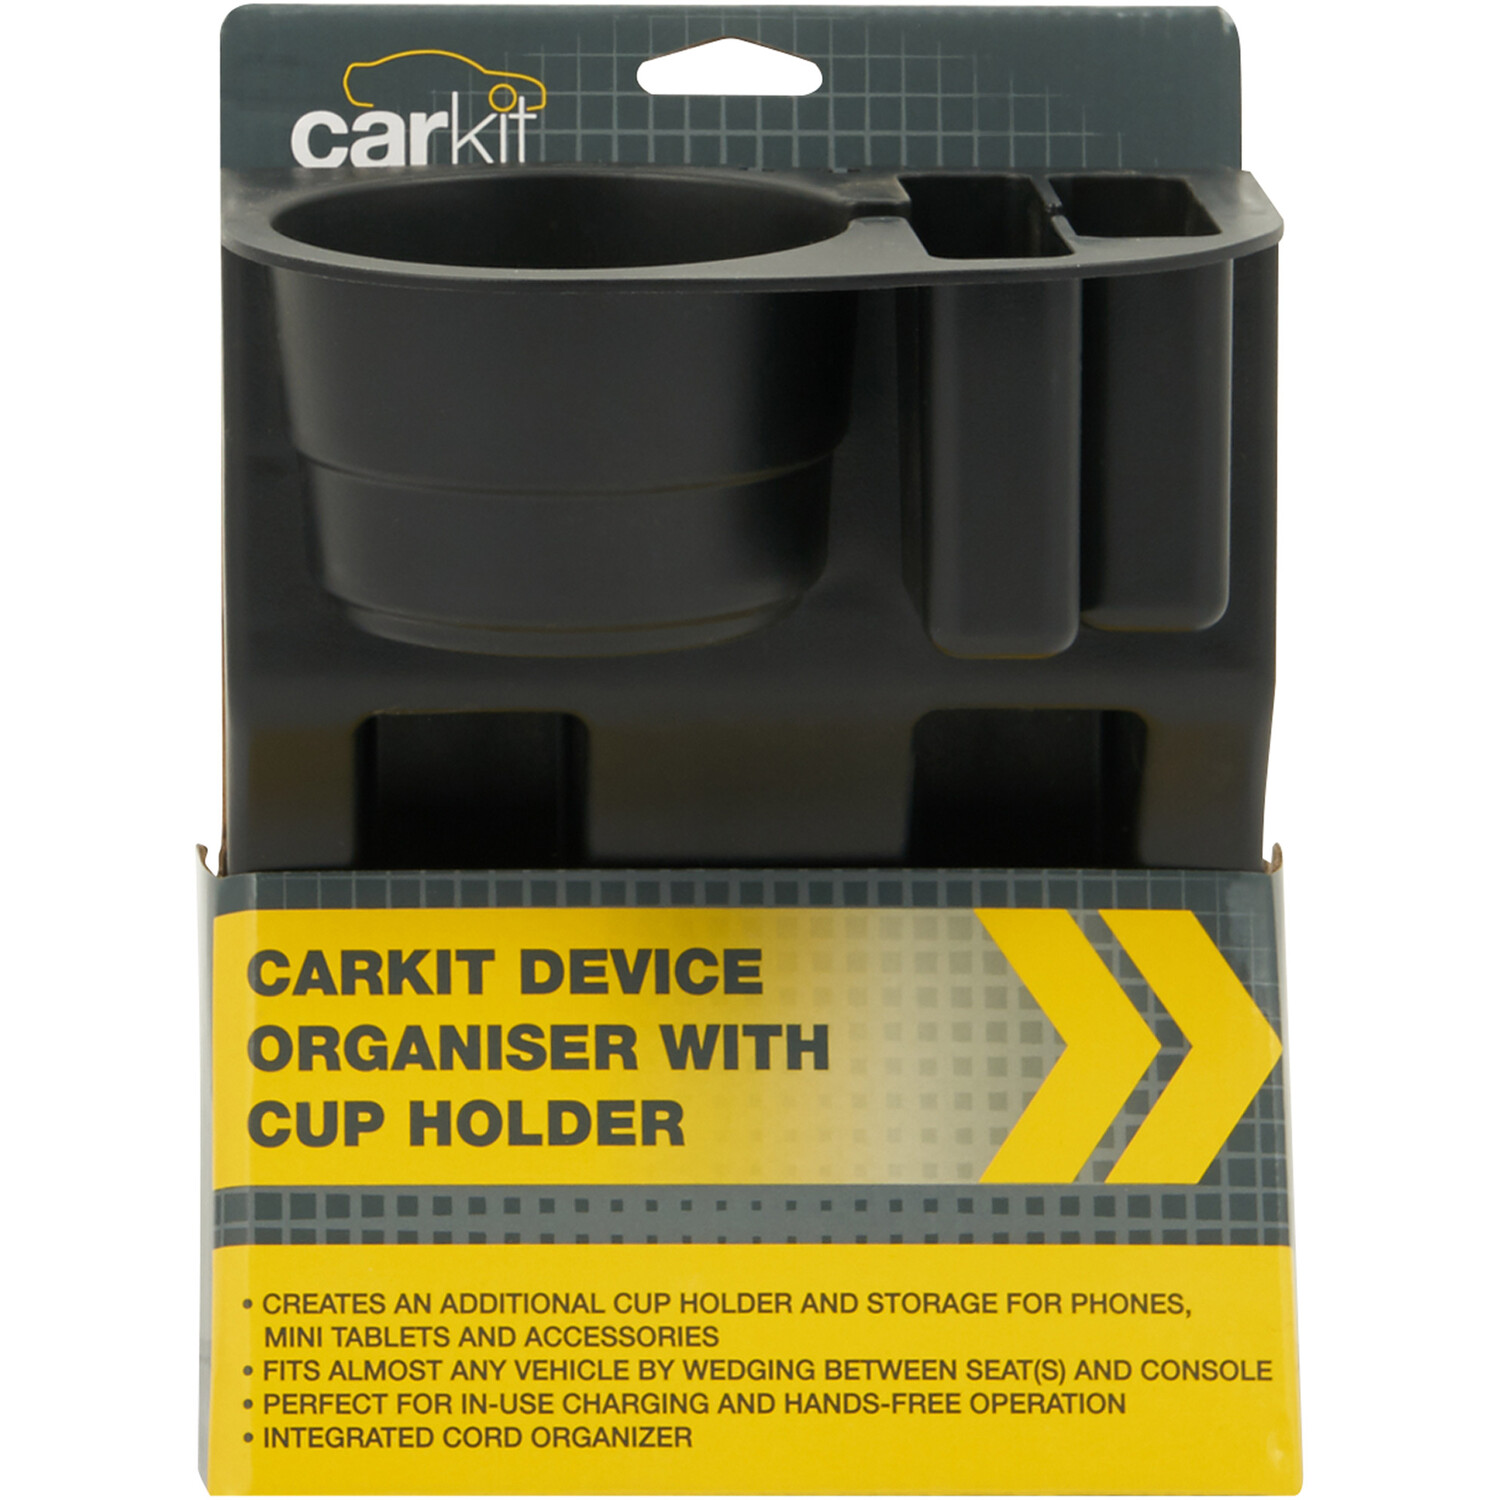 Carkit Device Organiser with Cup Holder Image 1